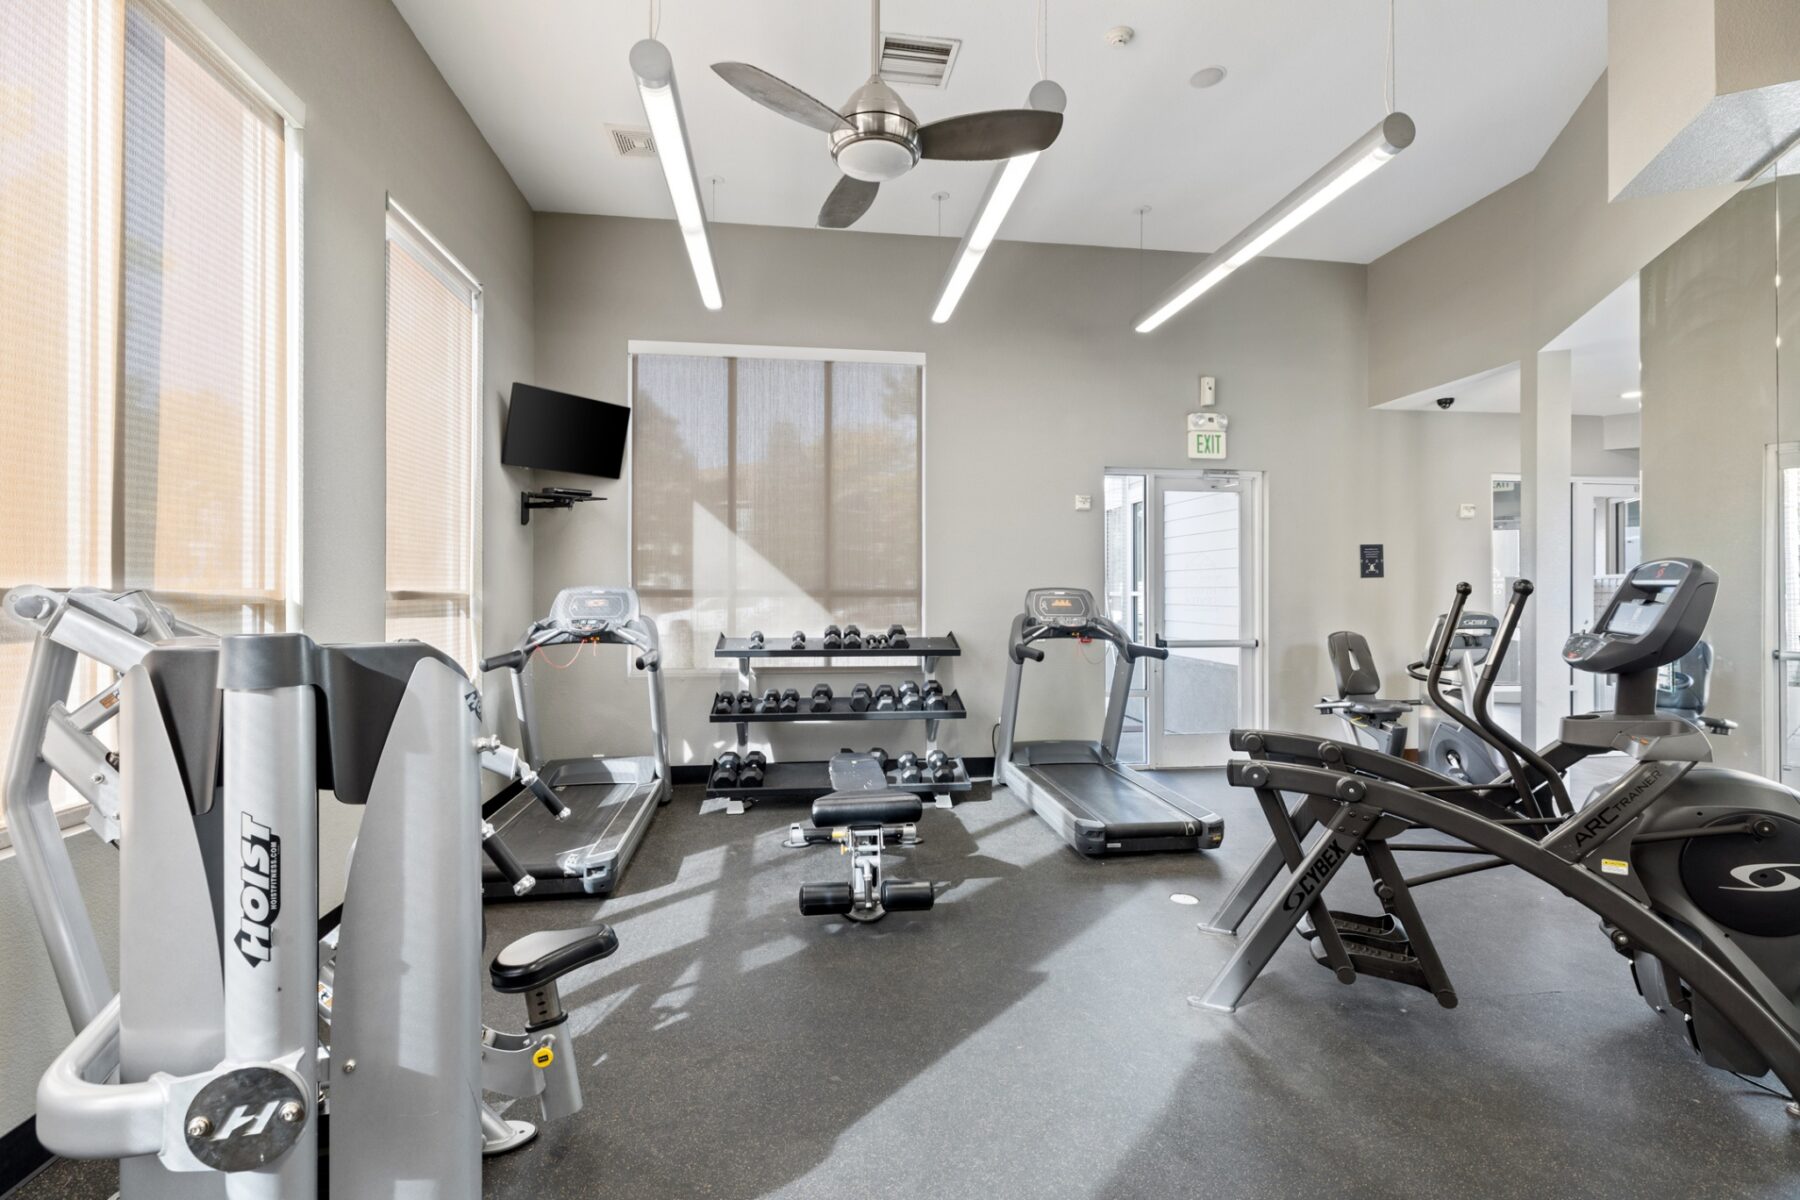 Fitness center with strength training equipment and cardio machines